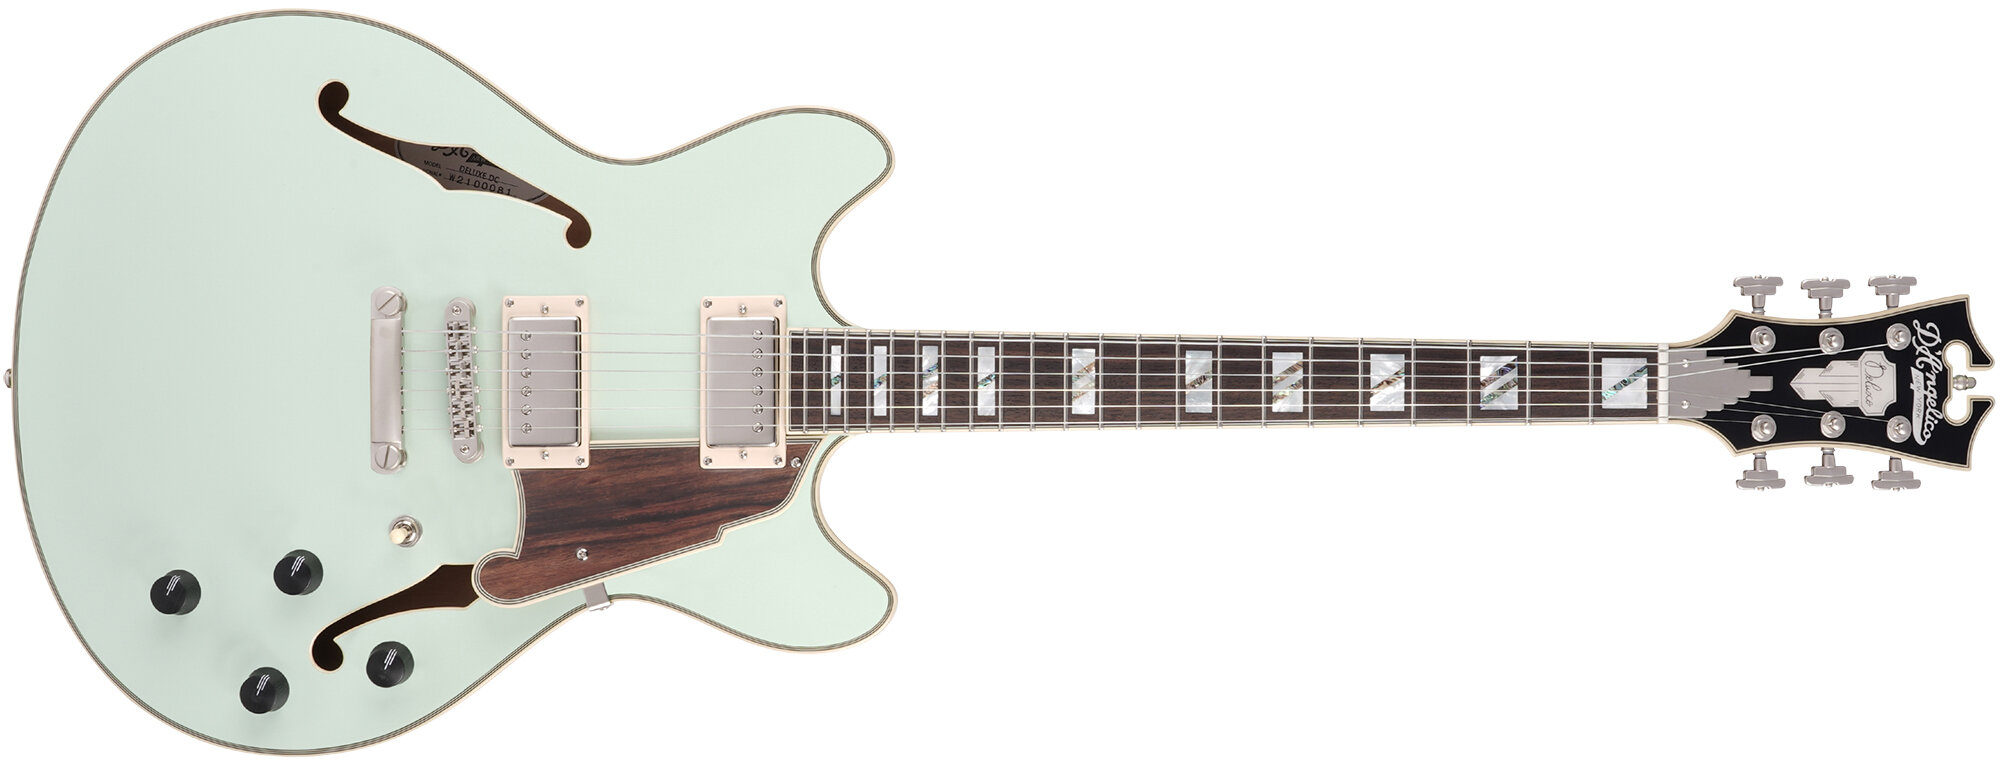 D'Angelico (ディアンジェリコ) Deluxeシリーズの限定モデルが18機種 